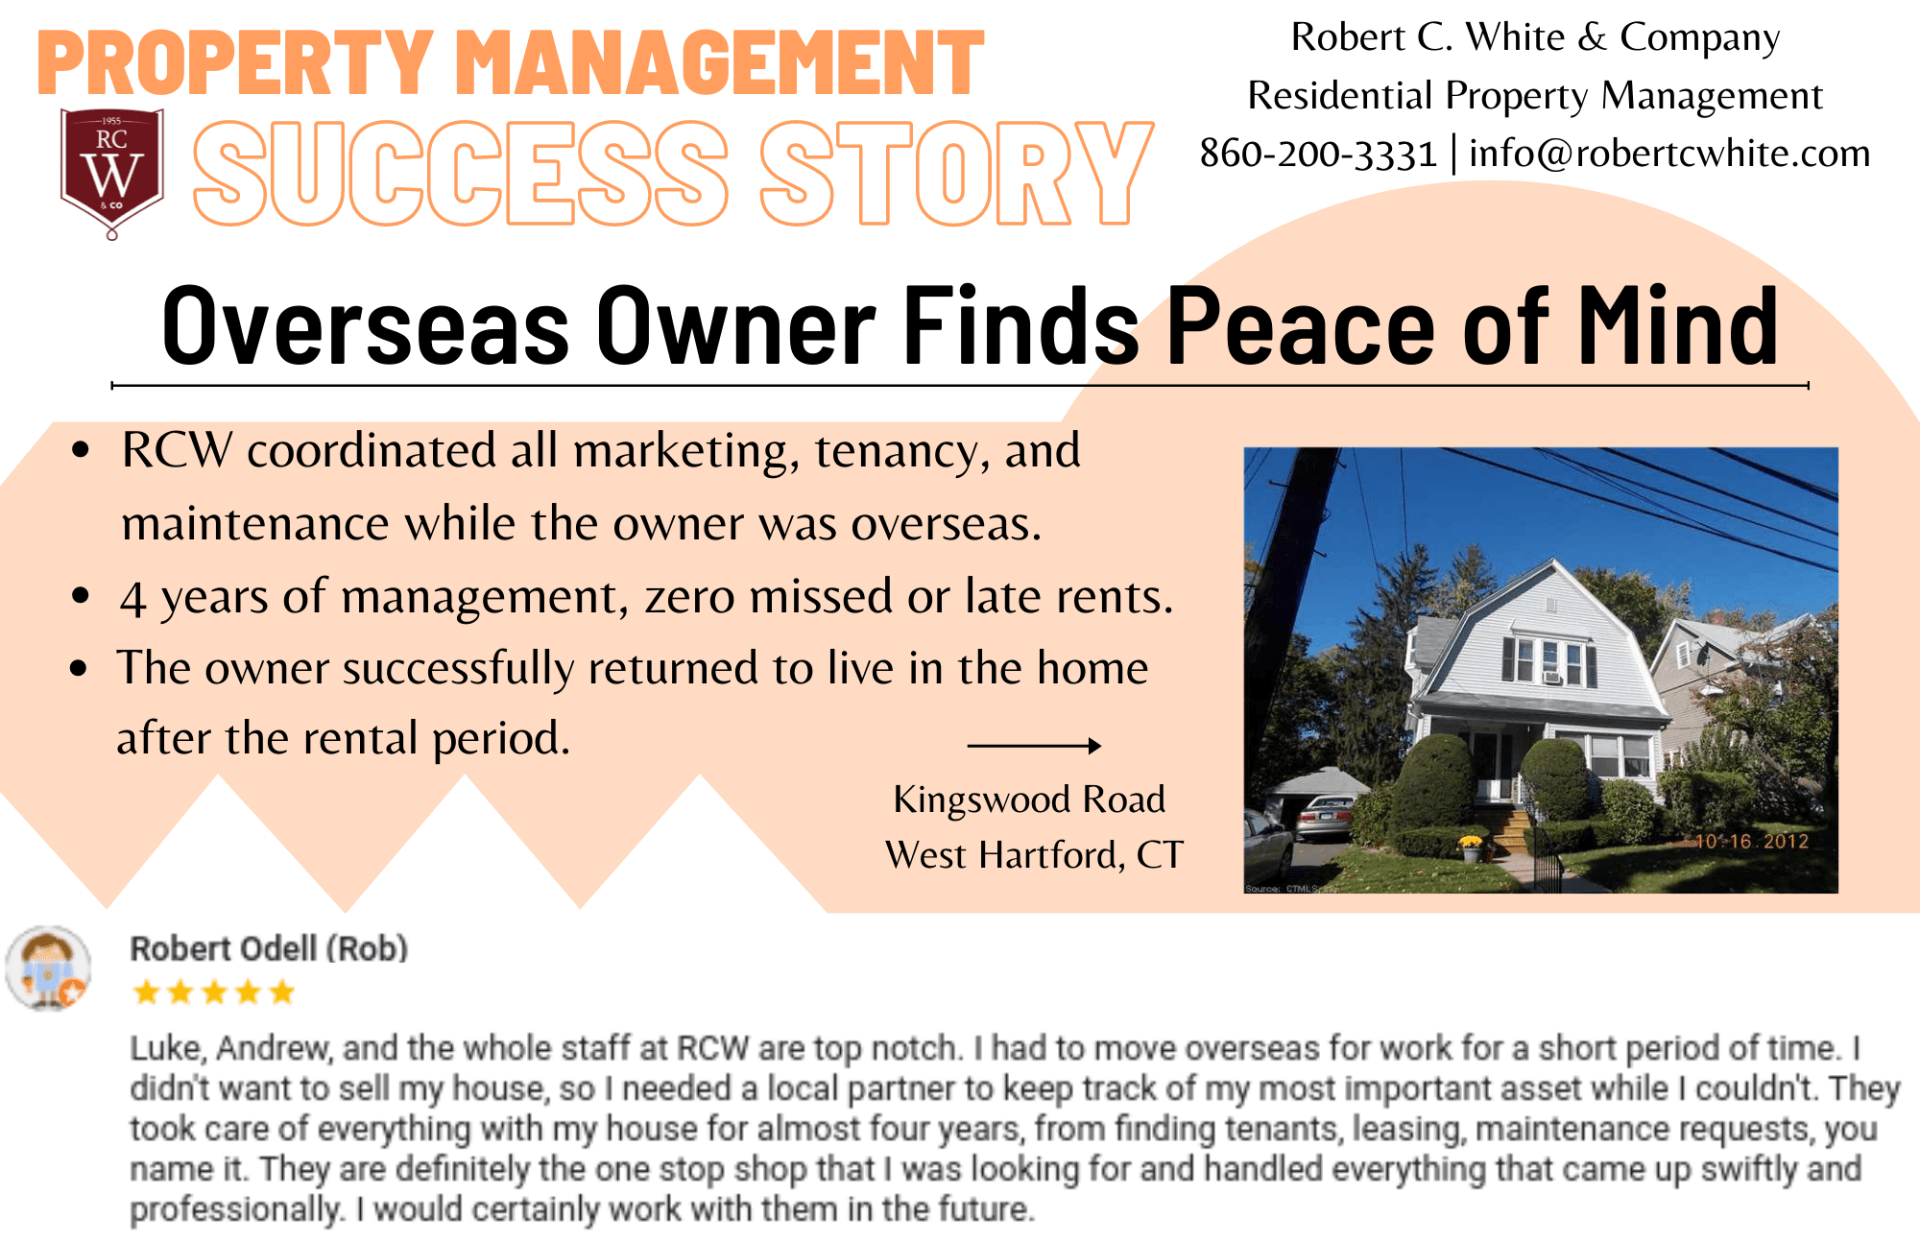 Property management success story - Rob